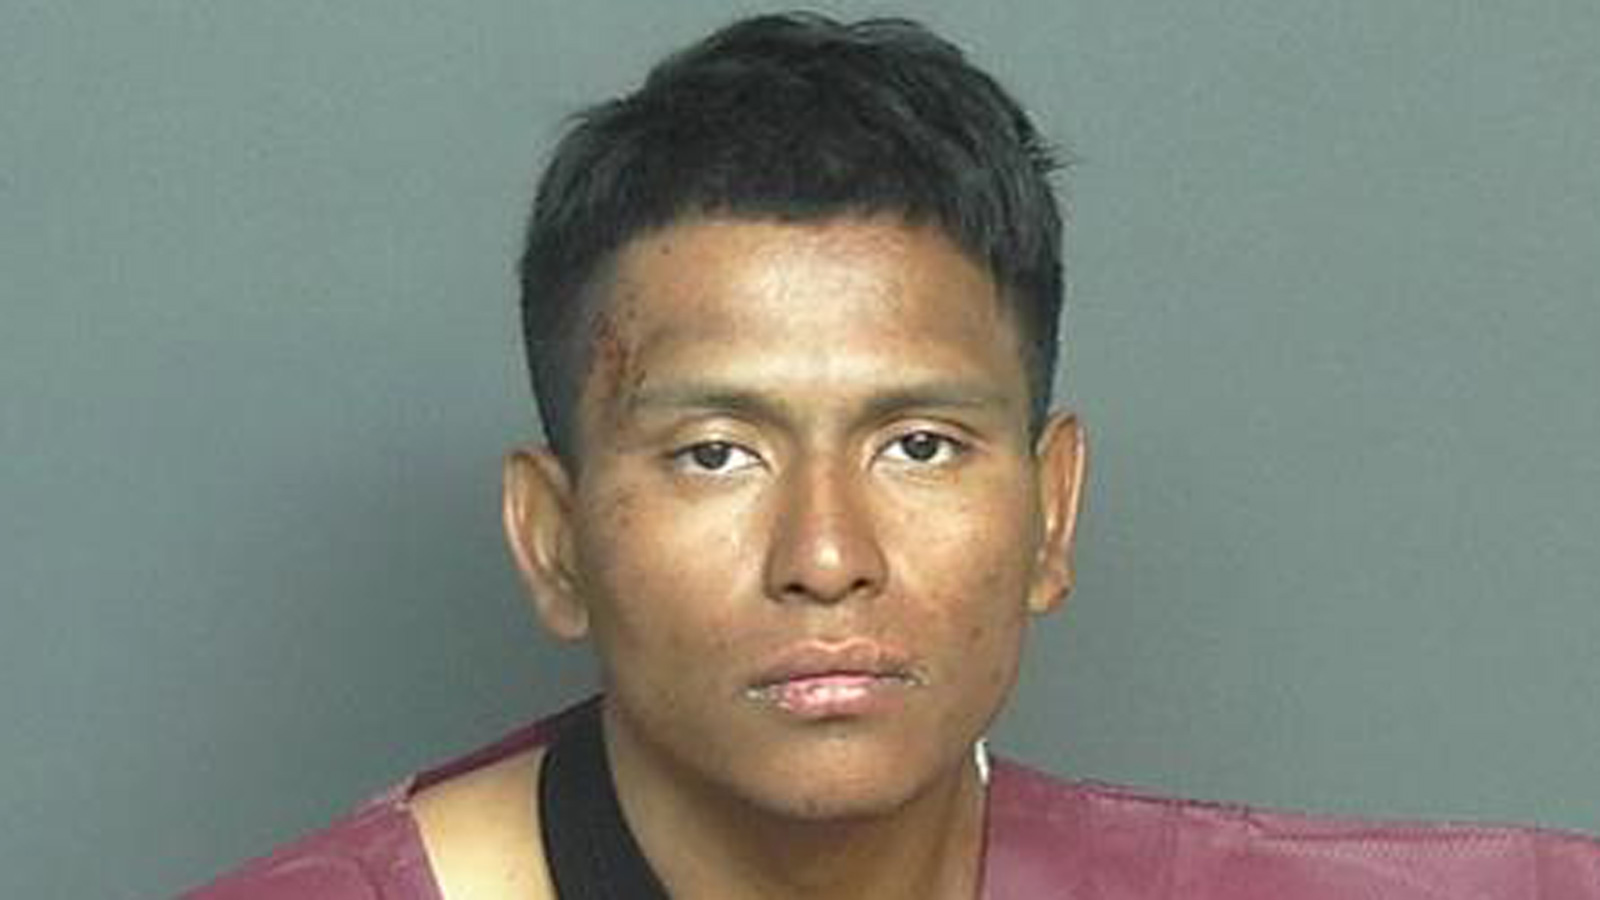 Mugshot of Gohan Kancab, a shoplifting suspect who was shot by a Glendale police officer on Sunday,...